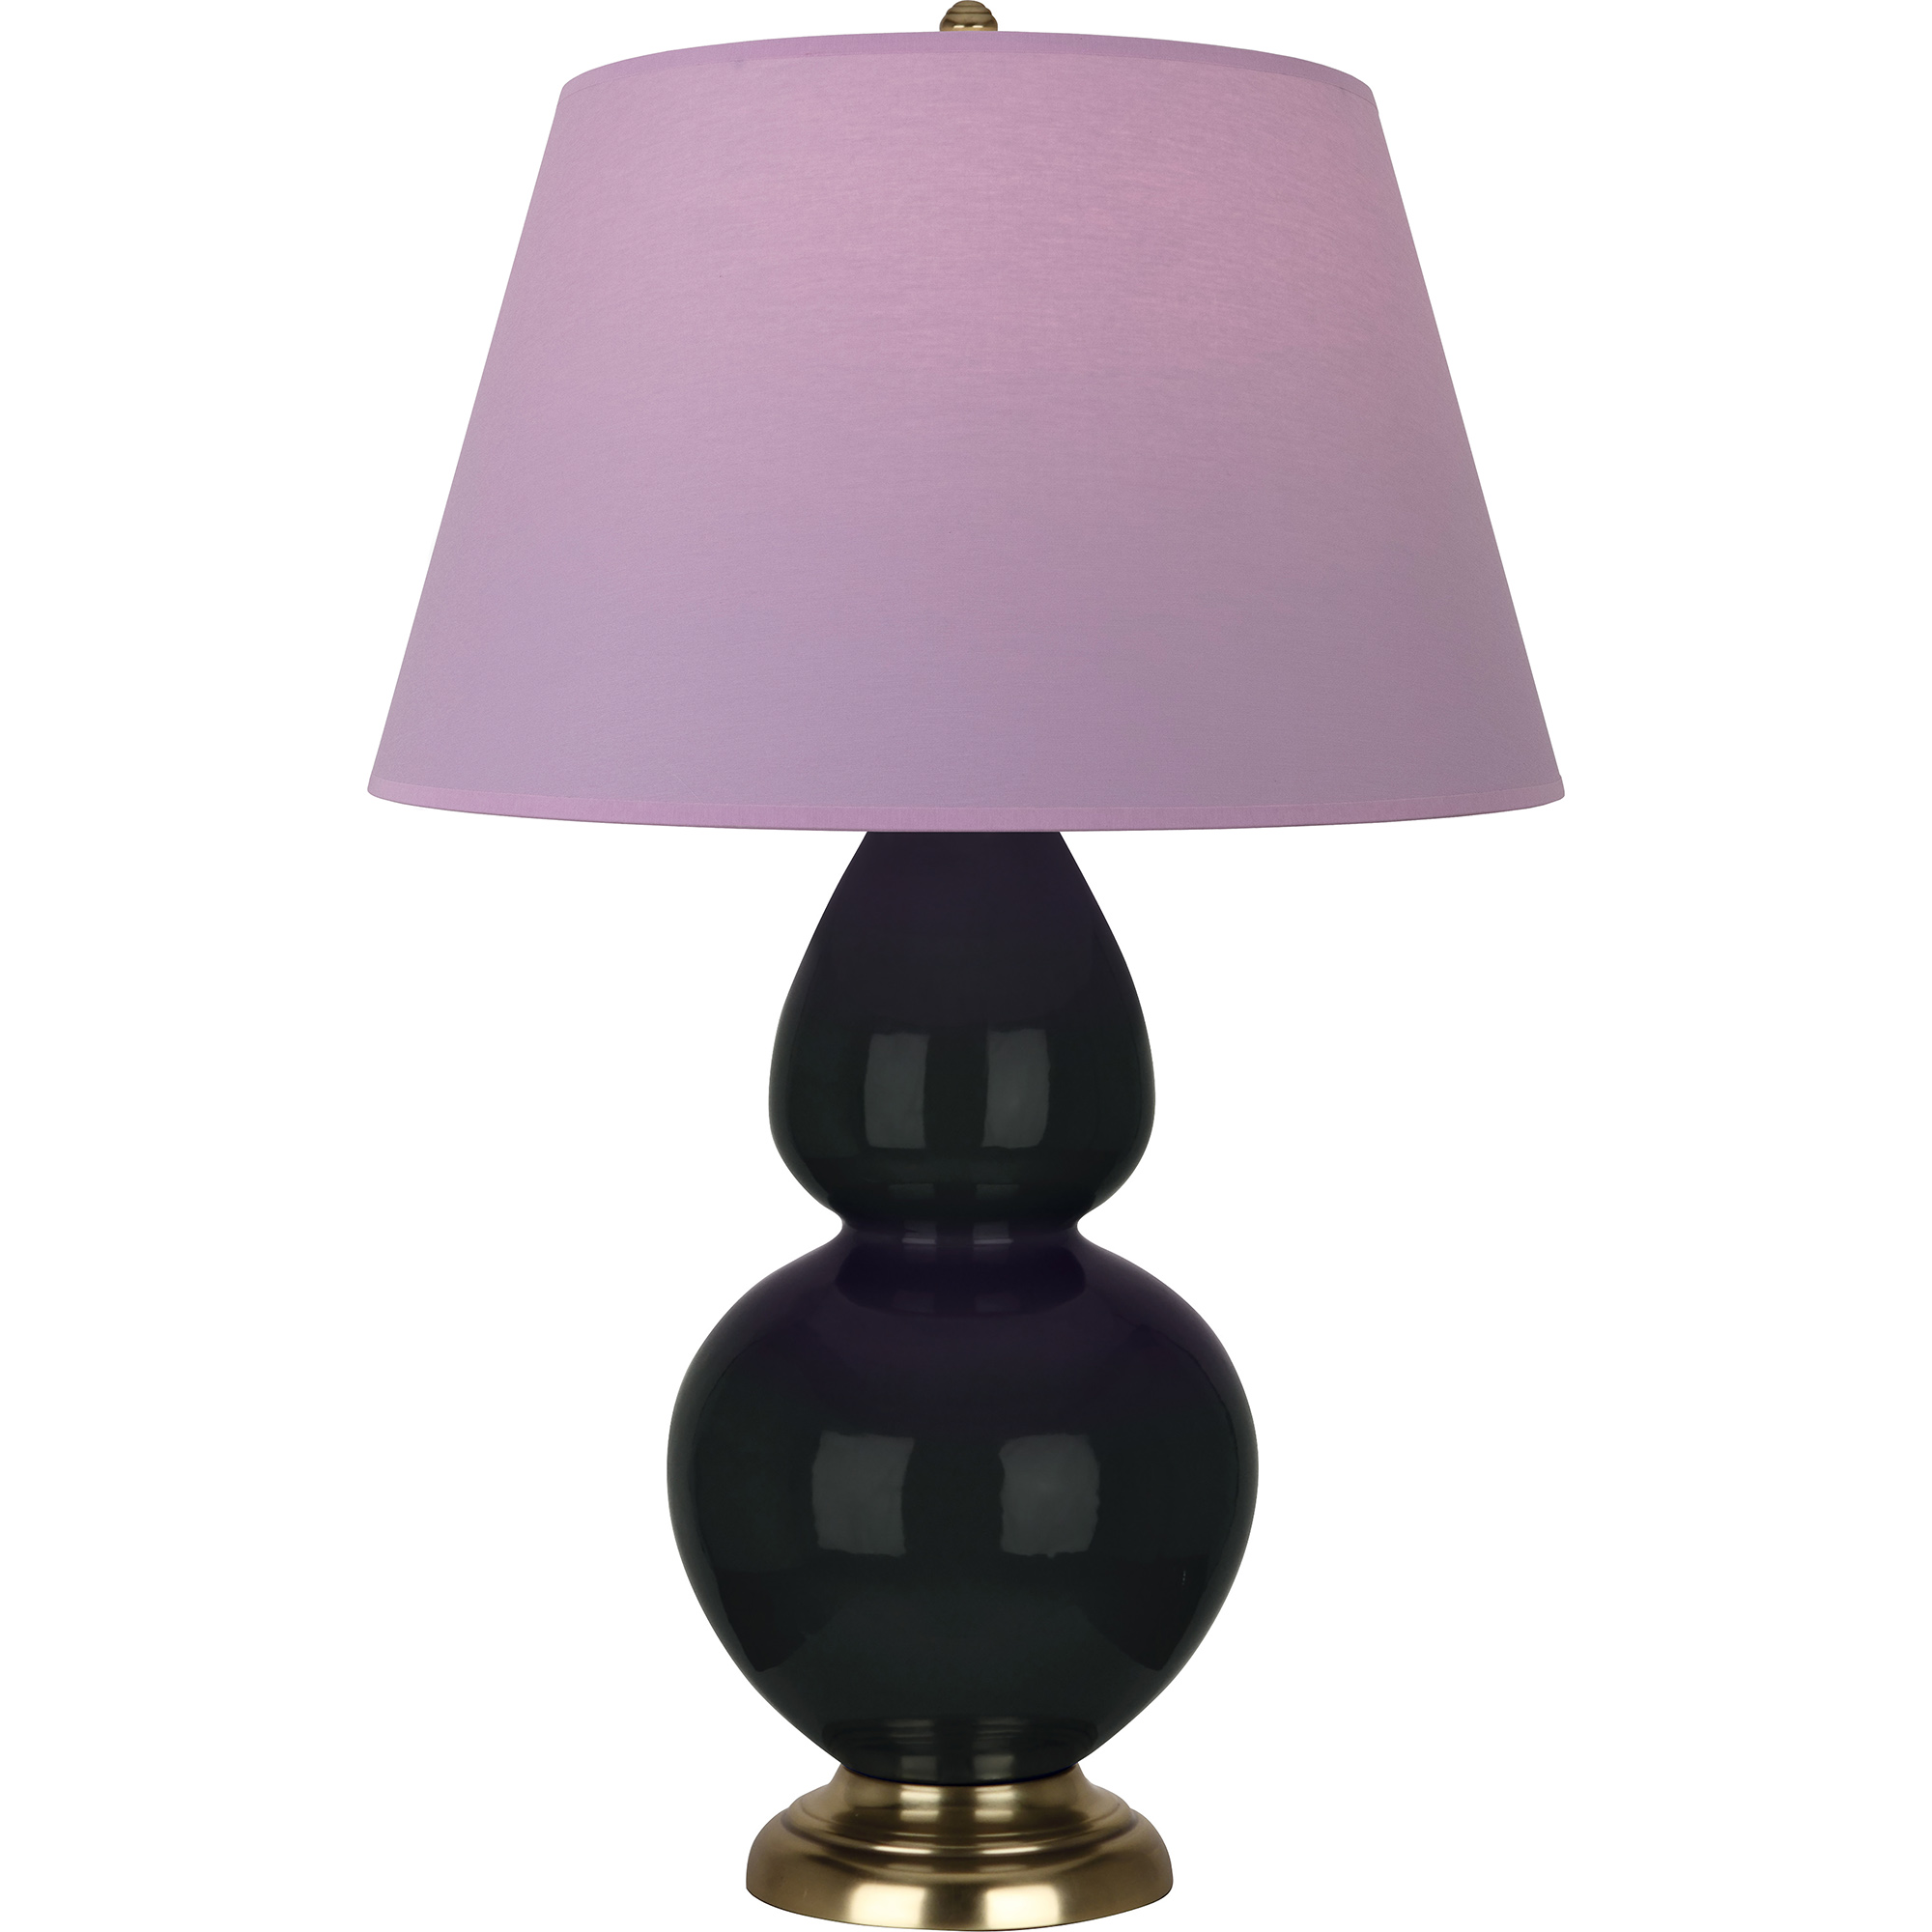 Double Gourd Table Lamp Style #OS20L